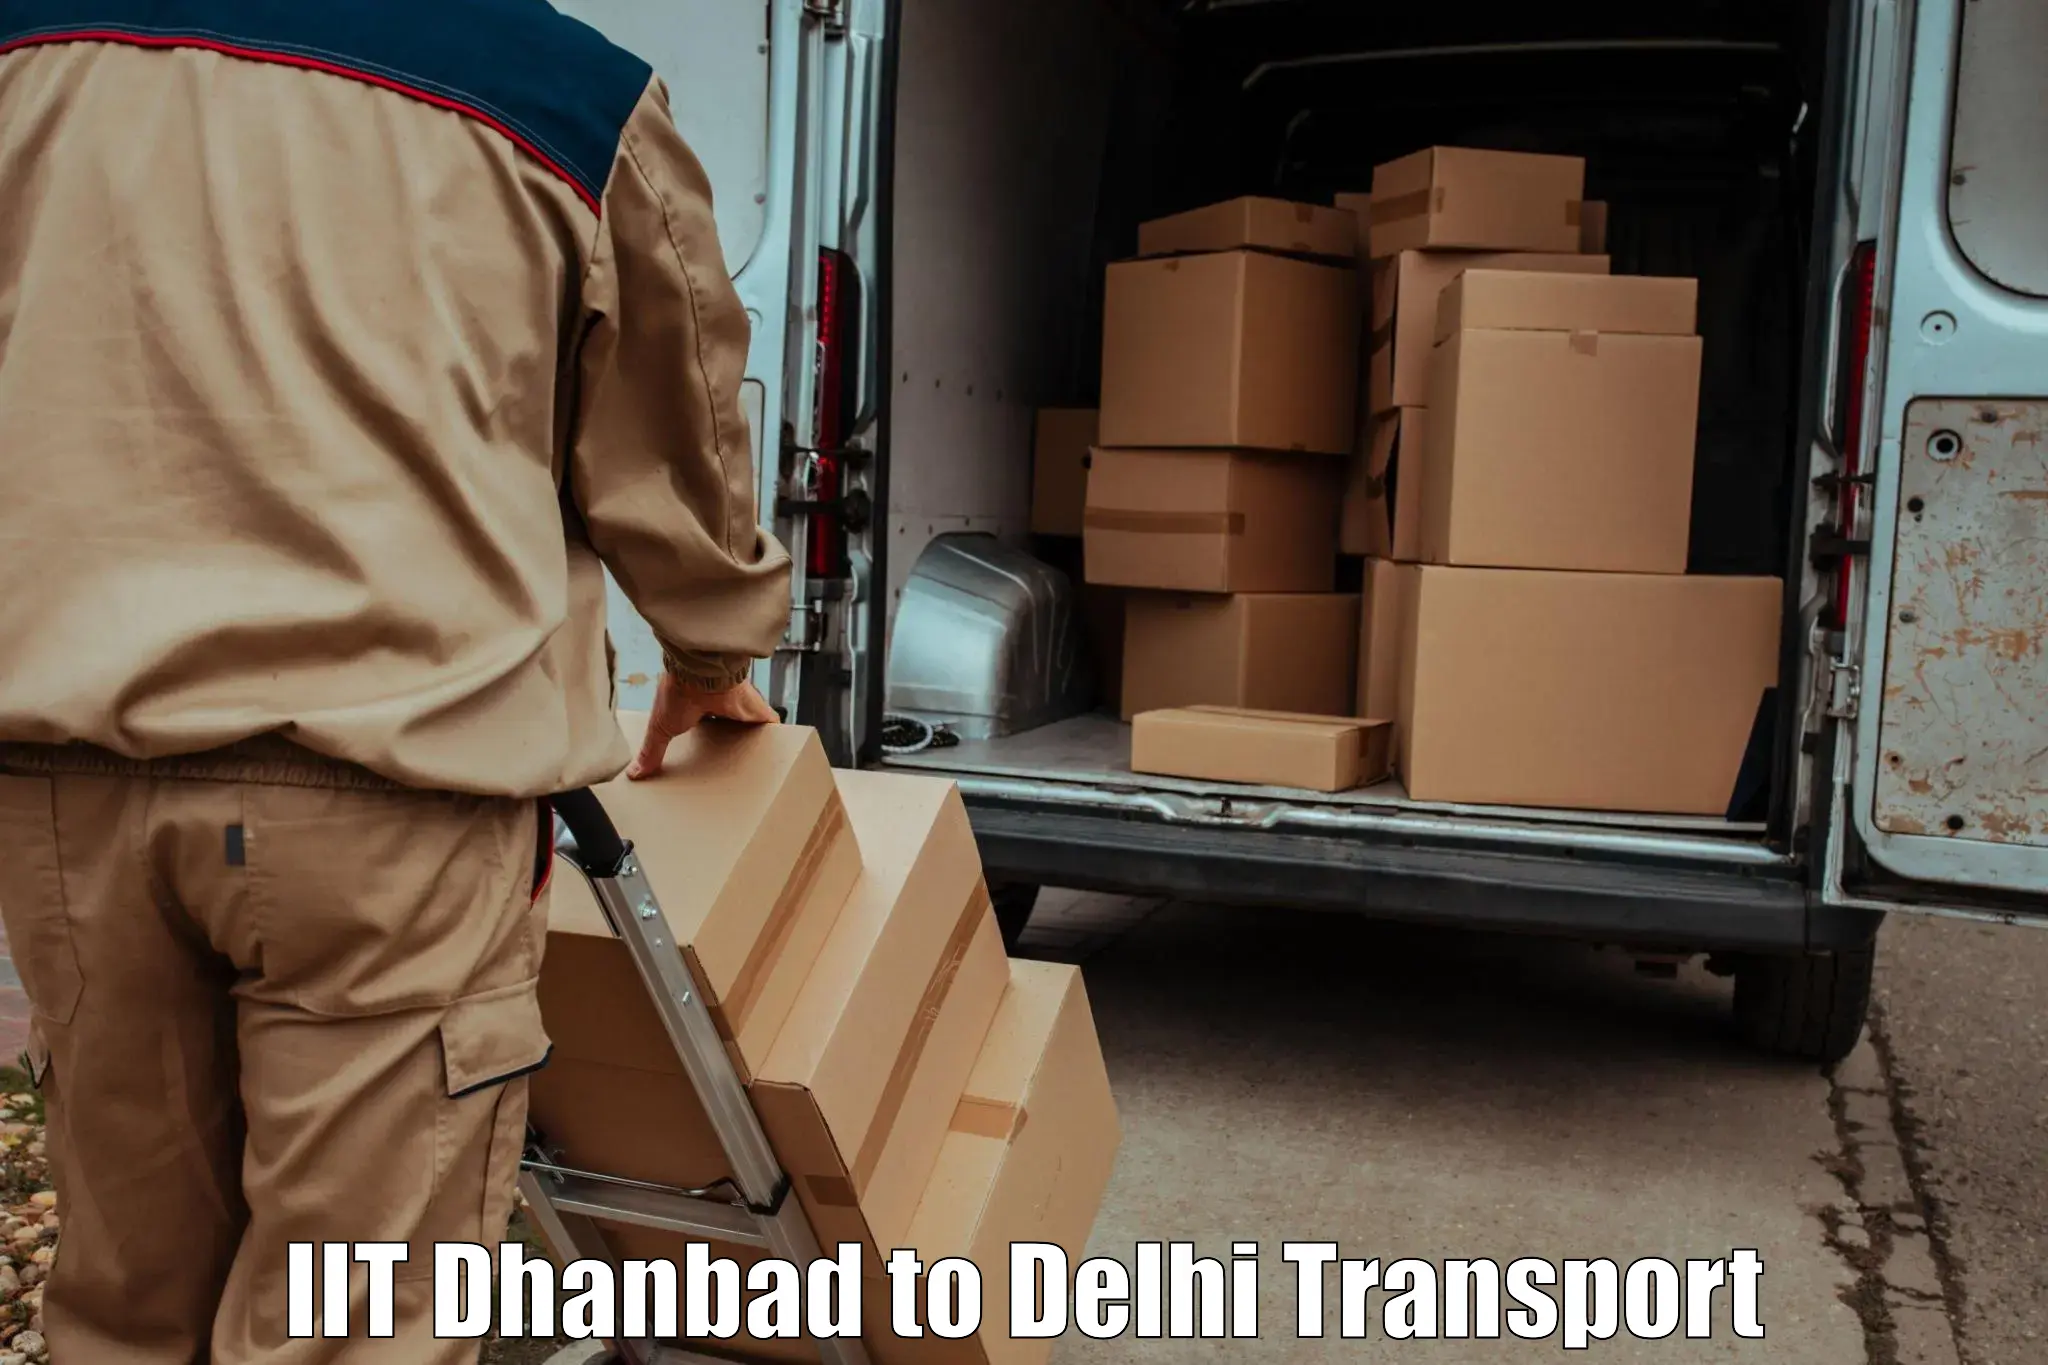 Transport bike from one state to another IIT Dhanbad to Krishna Nagar